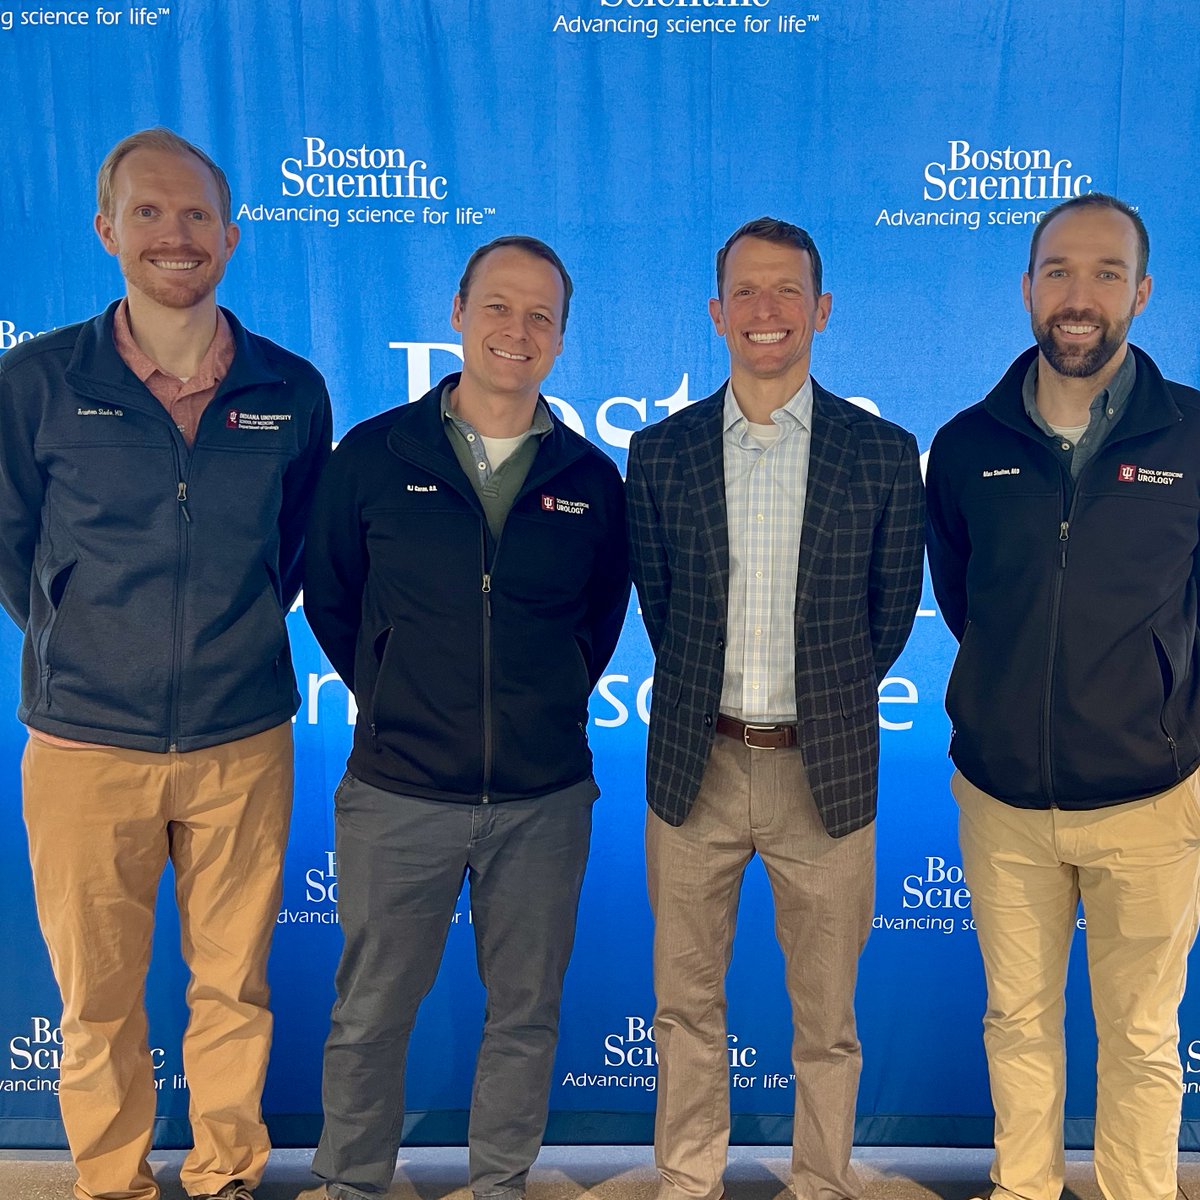 Thanks @bsc_urology for the behind the scenes look at manufacturing in nearby Spencer, IN. The fellows all enjoyed their time seeing how our everyday tools are made. So much urology history and innovation in the Hoosier State!